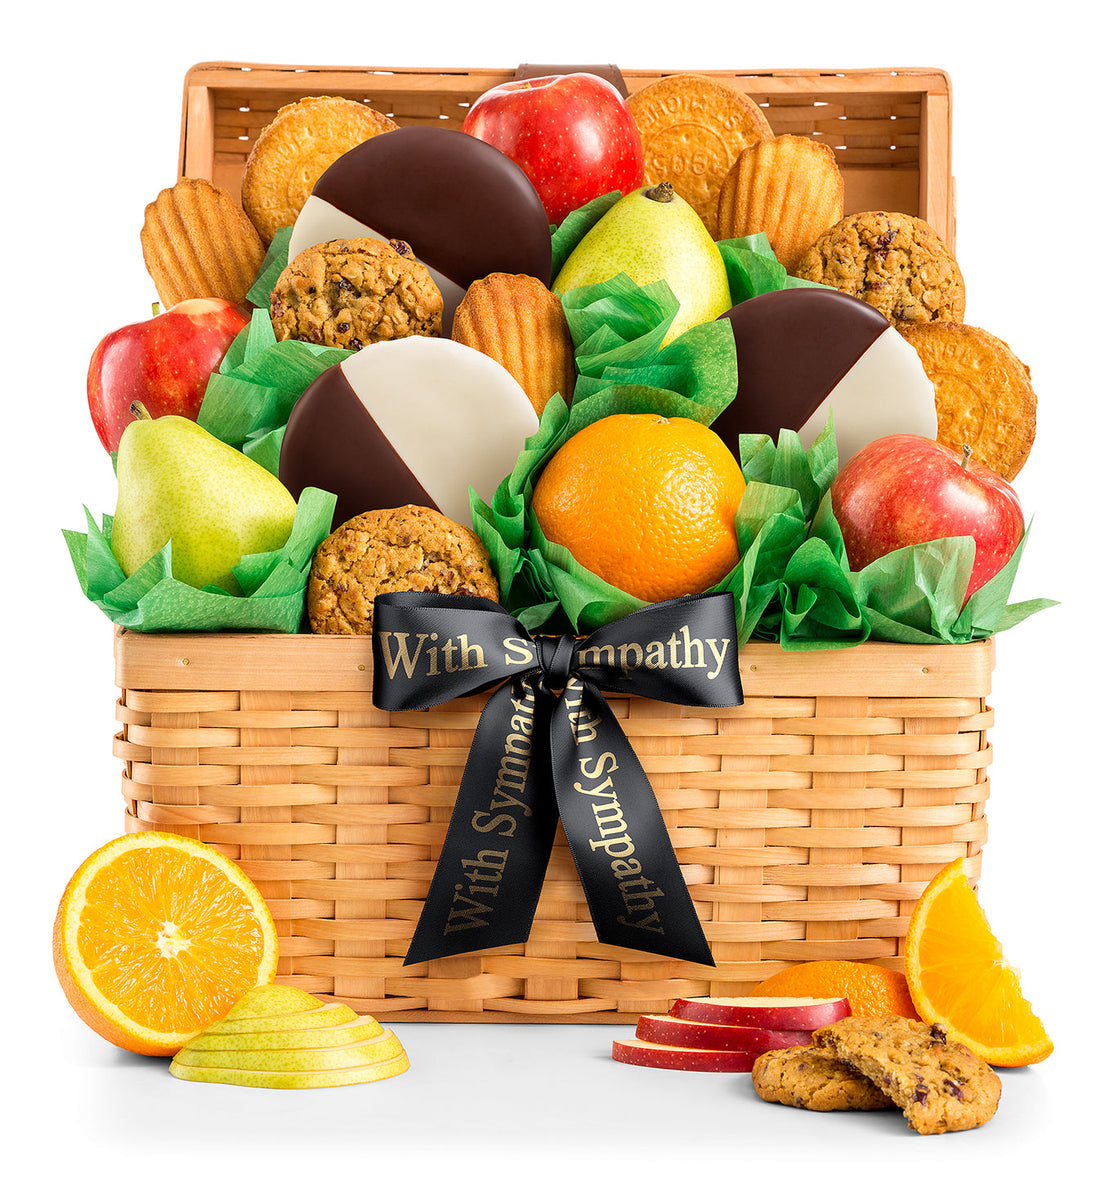 Sympathy Gift Baskets: Give Comfort in a Time of Loss